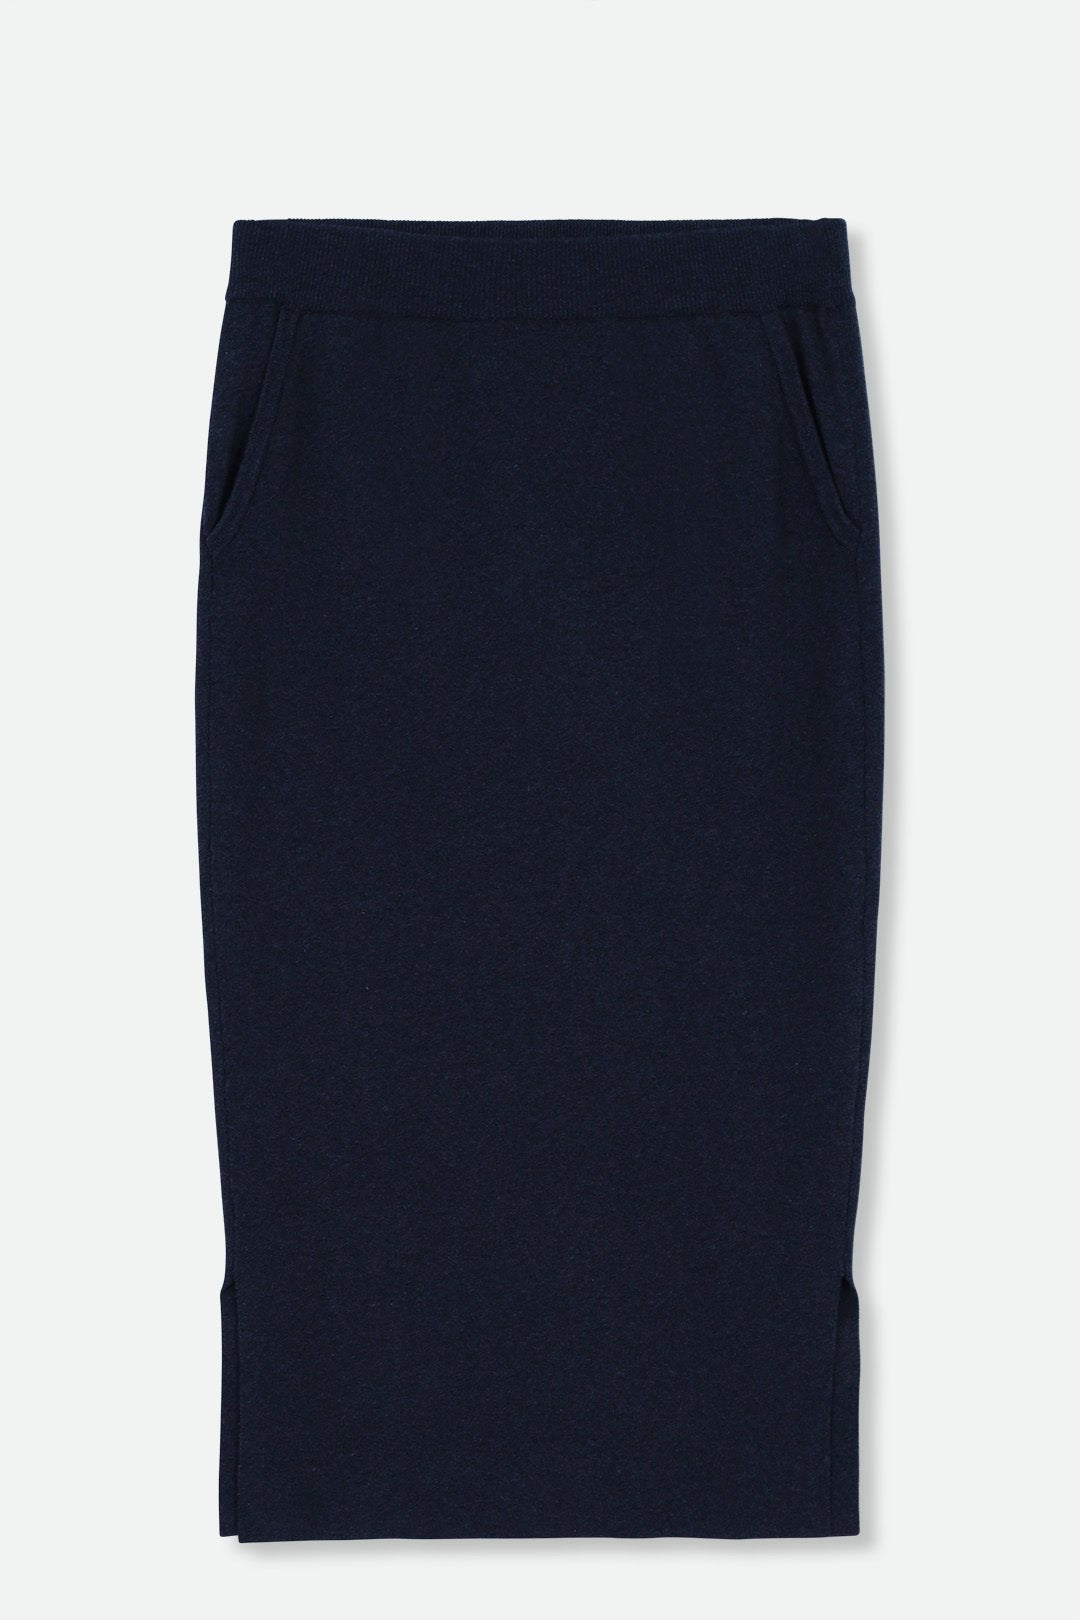 SICILY PENCIL SKIRT IN KNIT PIMA COTTON STRETCH IN NAVY - Jarbo